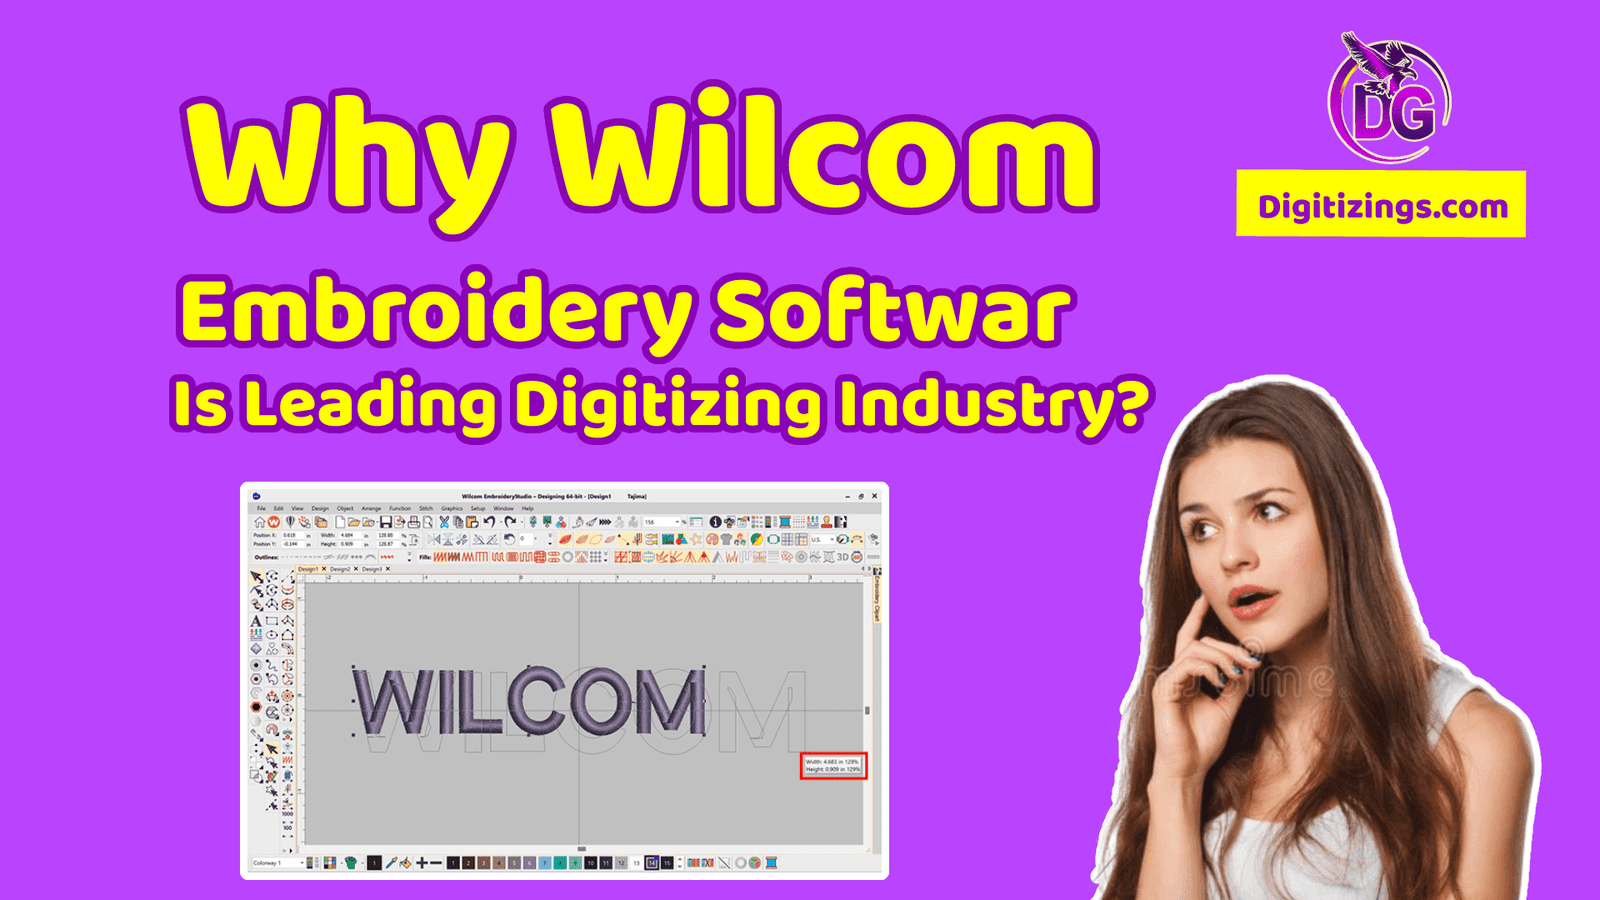 Why Wilcom Embroidery Software Leading Digitizing Industry